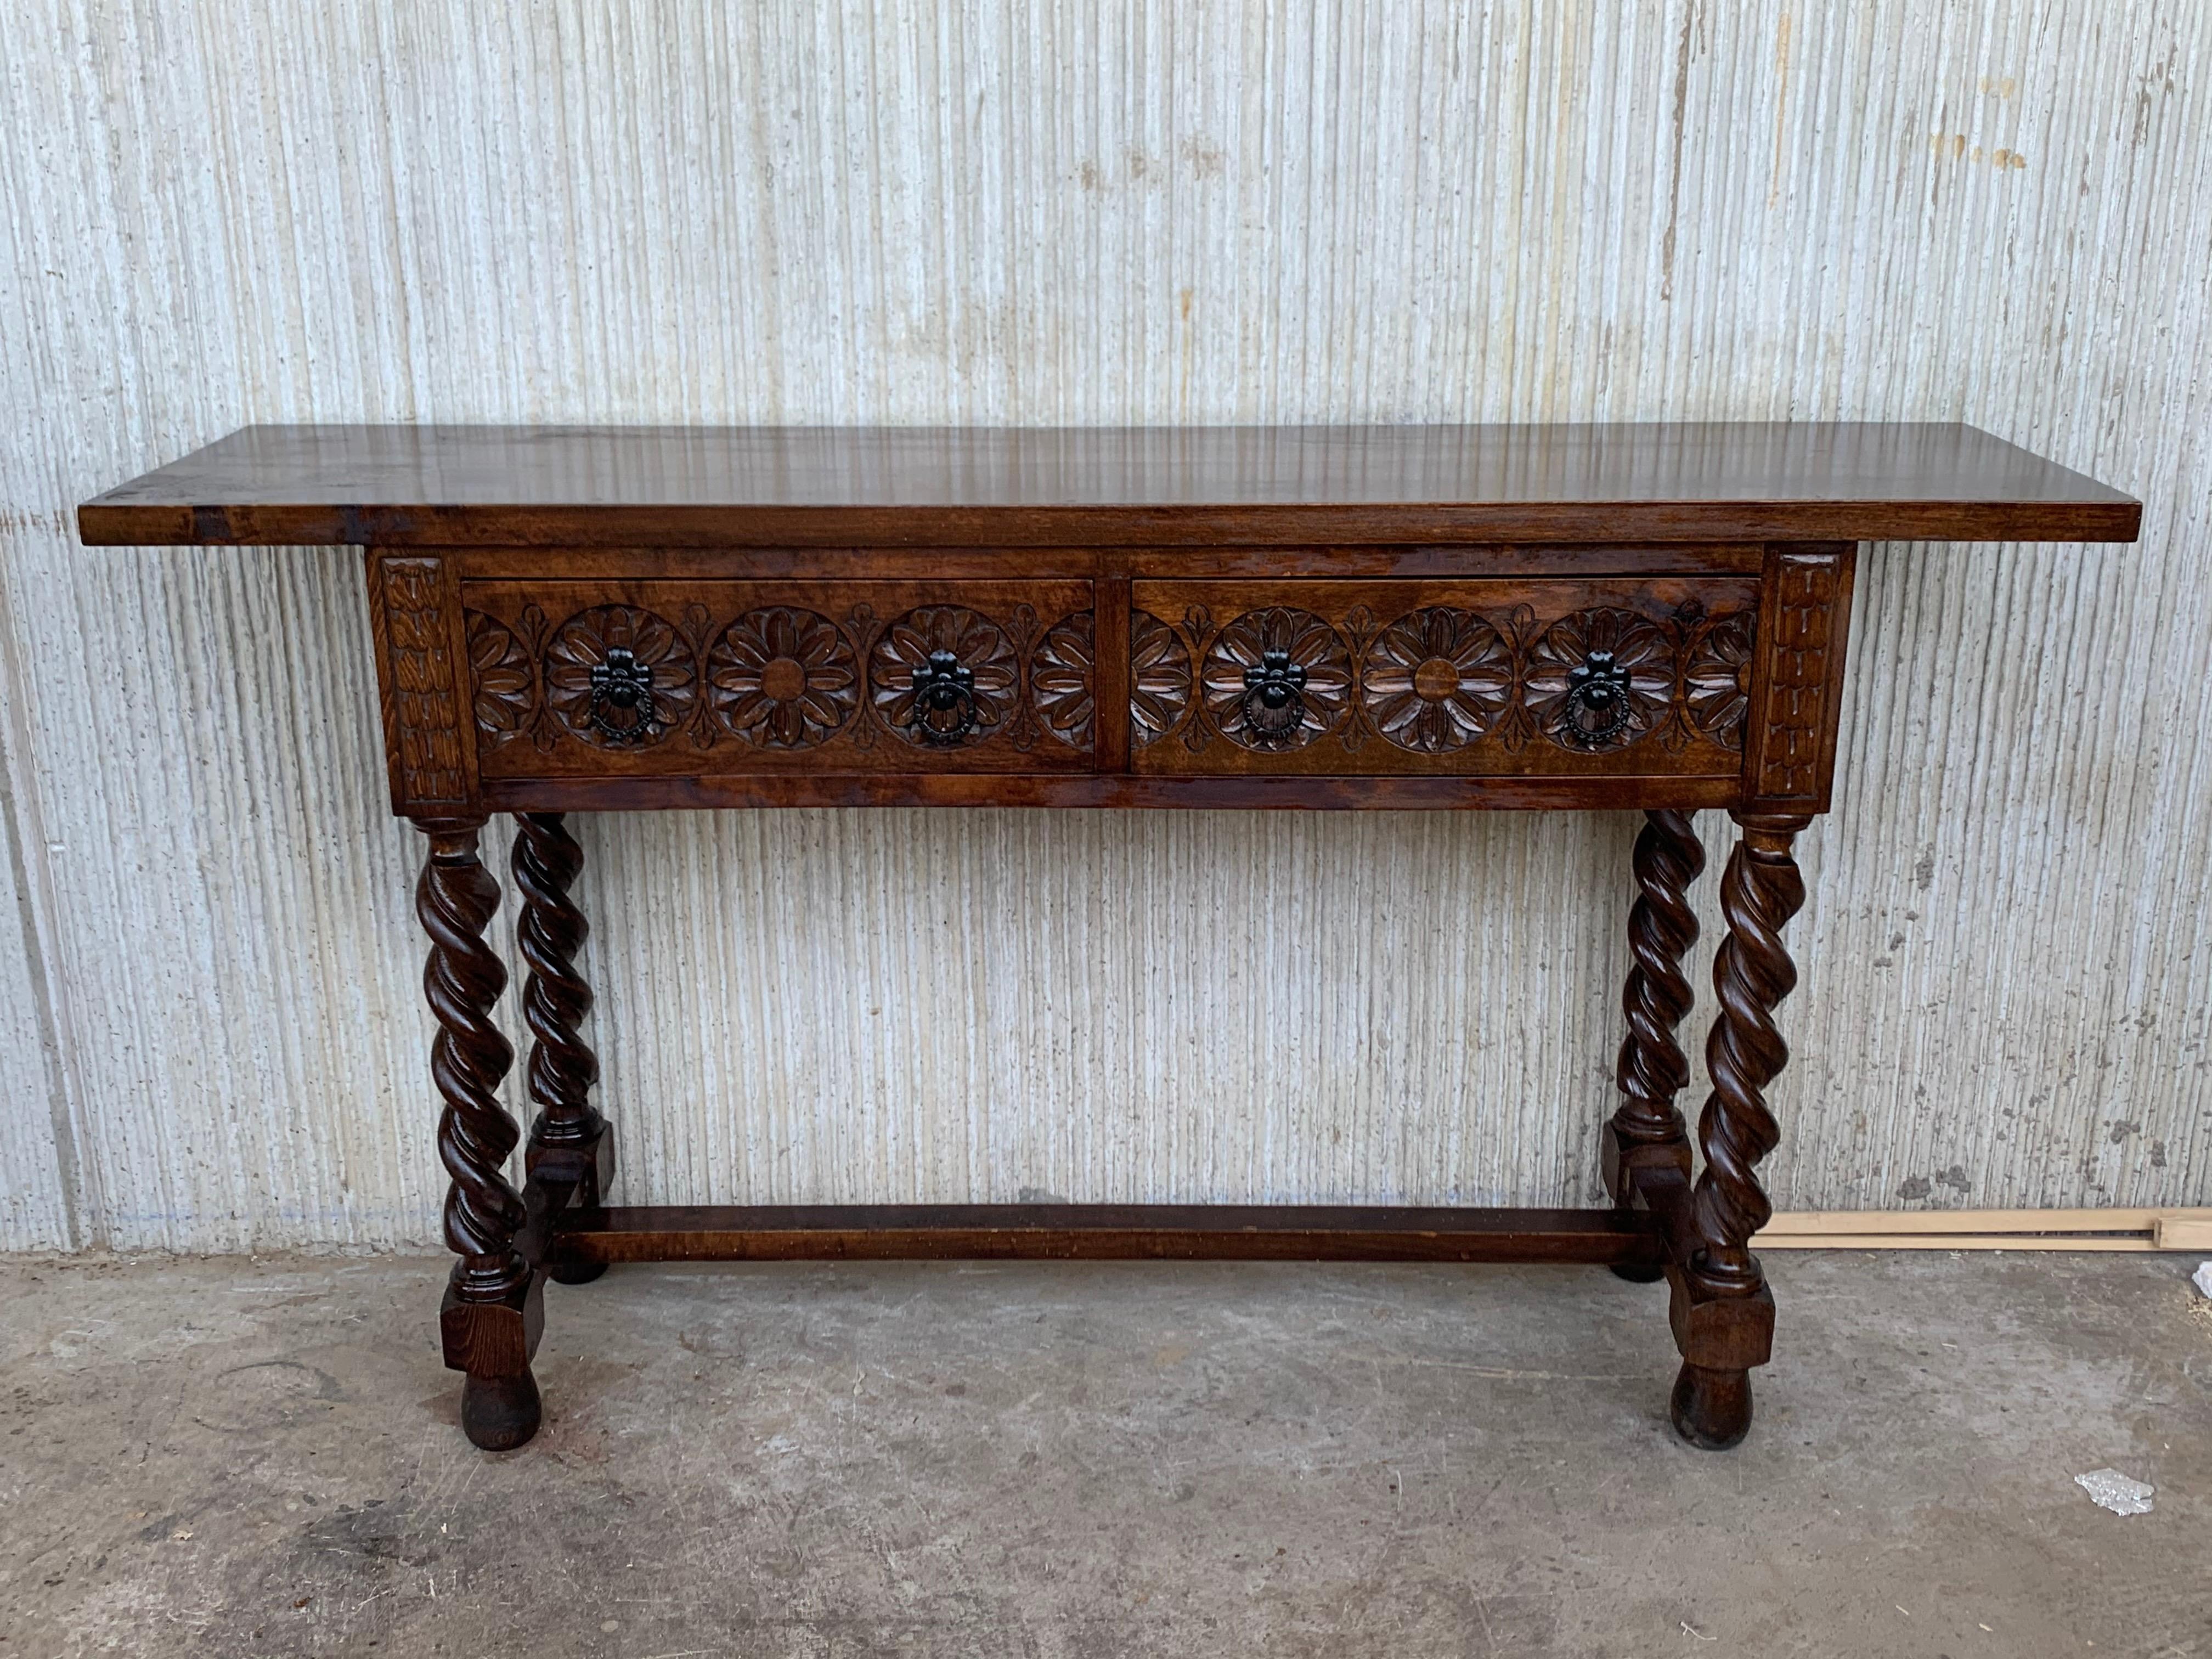 20th century Spanish console table with two drawers and solomonic legs.
Beautiful geometrical carved drawers and Solomonic legs. 
Original iron hardware.
 